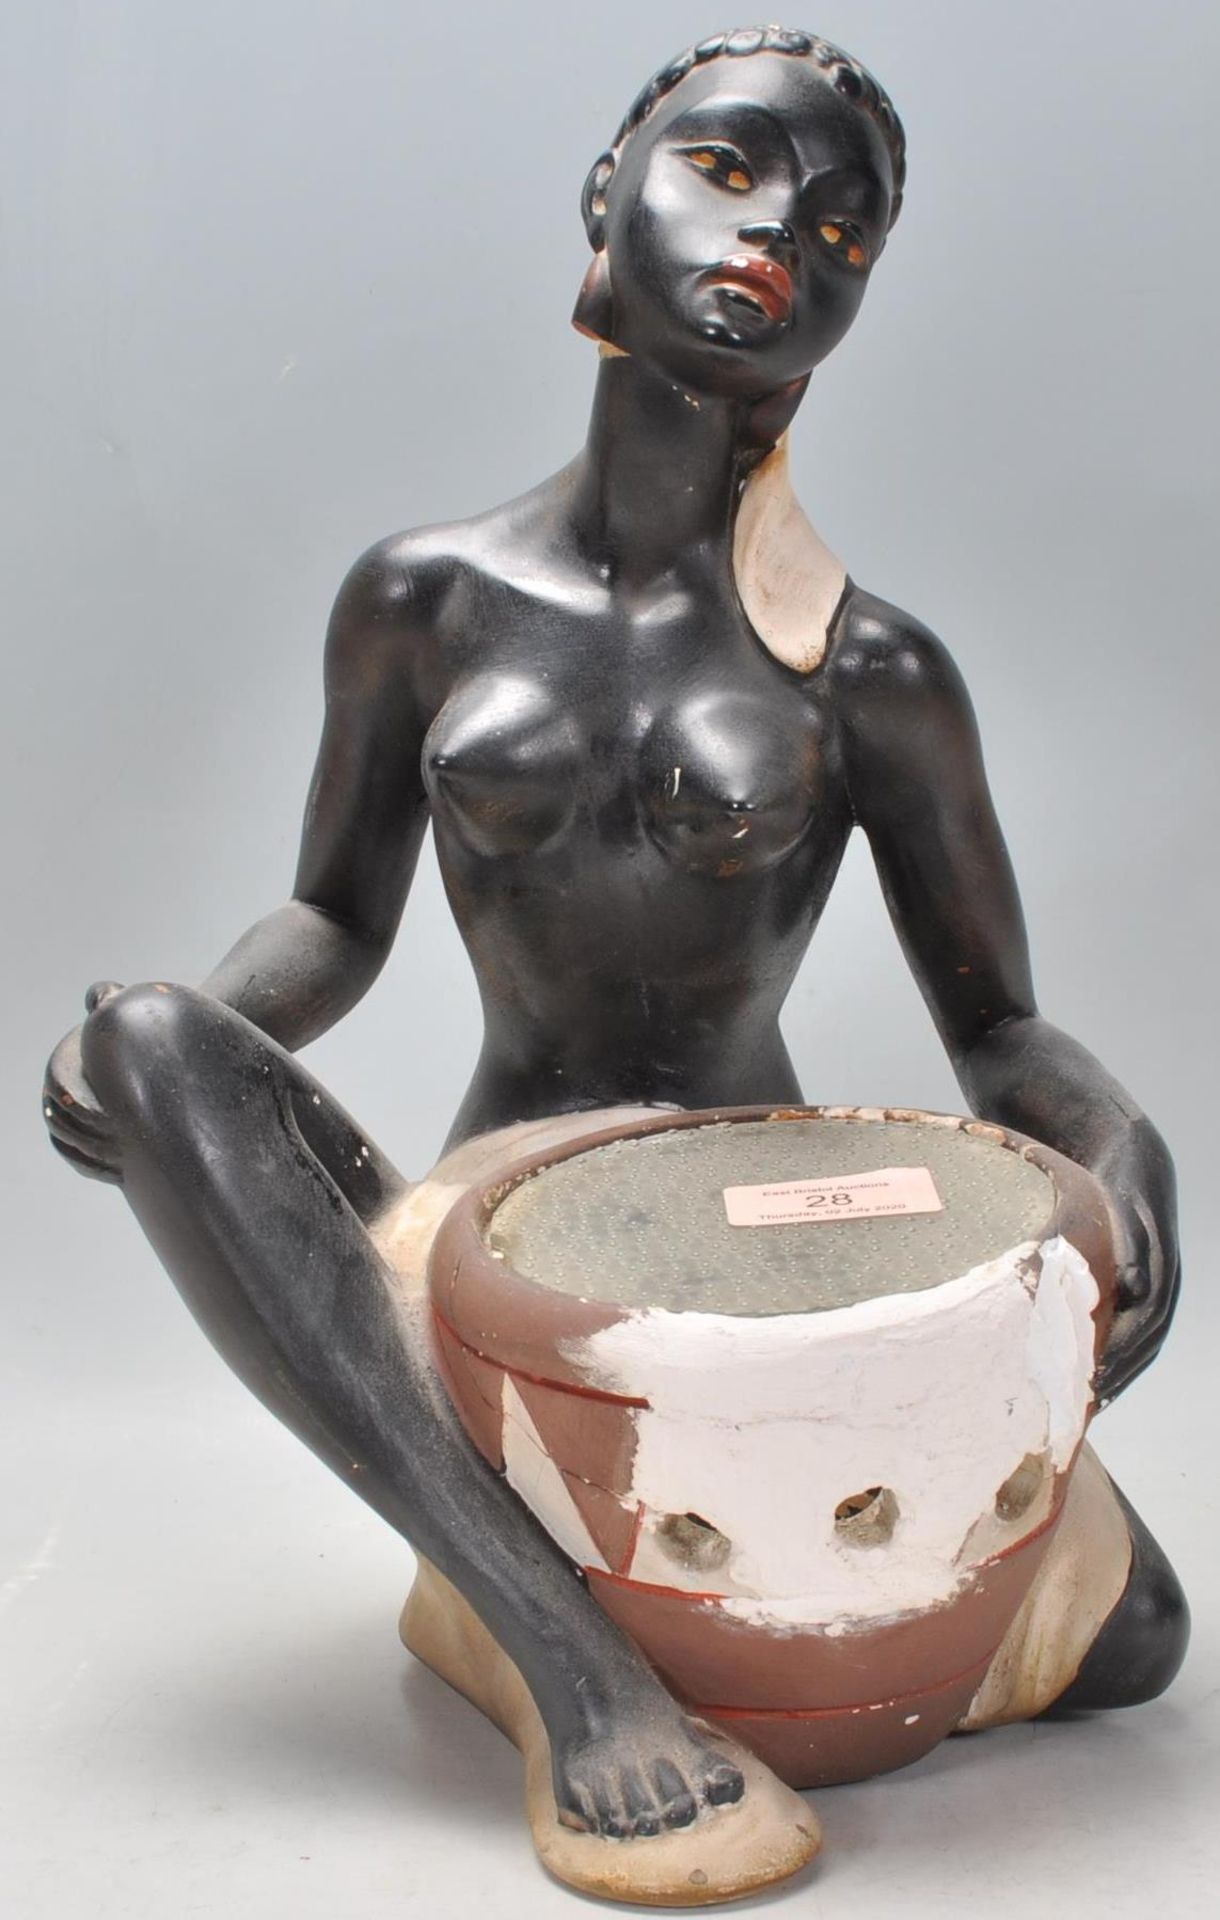 A vintage early 20th century Art Deco chalk 1920s ware figurine in the form of a seated African